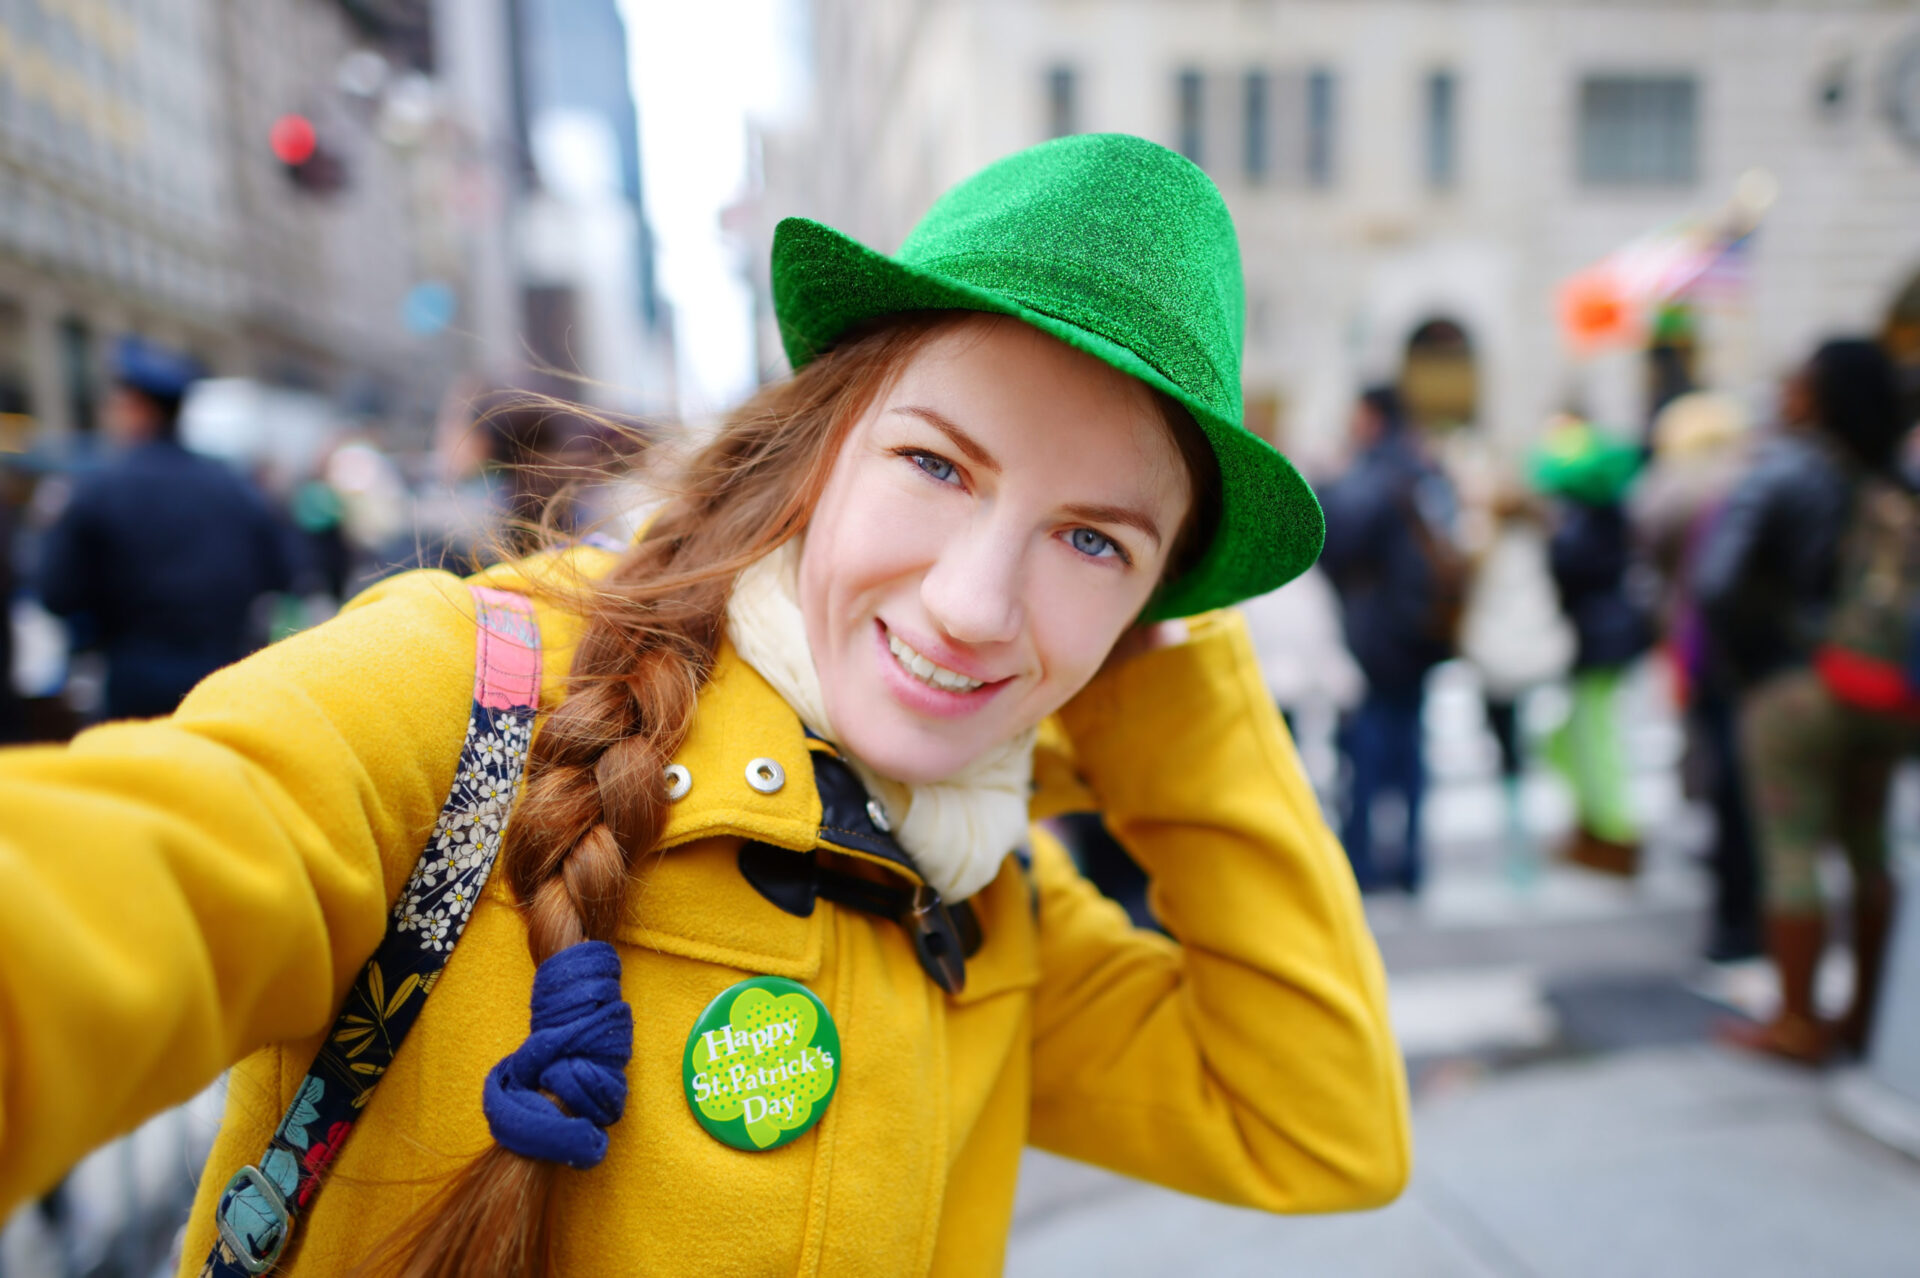 Mortgage Roundup (3/17/20) – Remote Working, Fewer Open Houses & St. Patrick’s Day